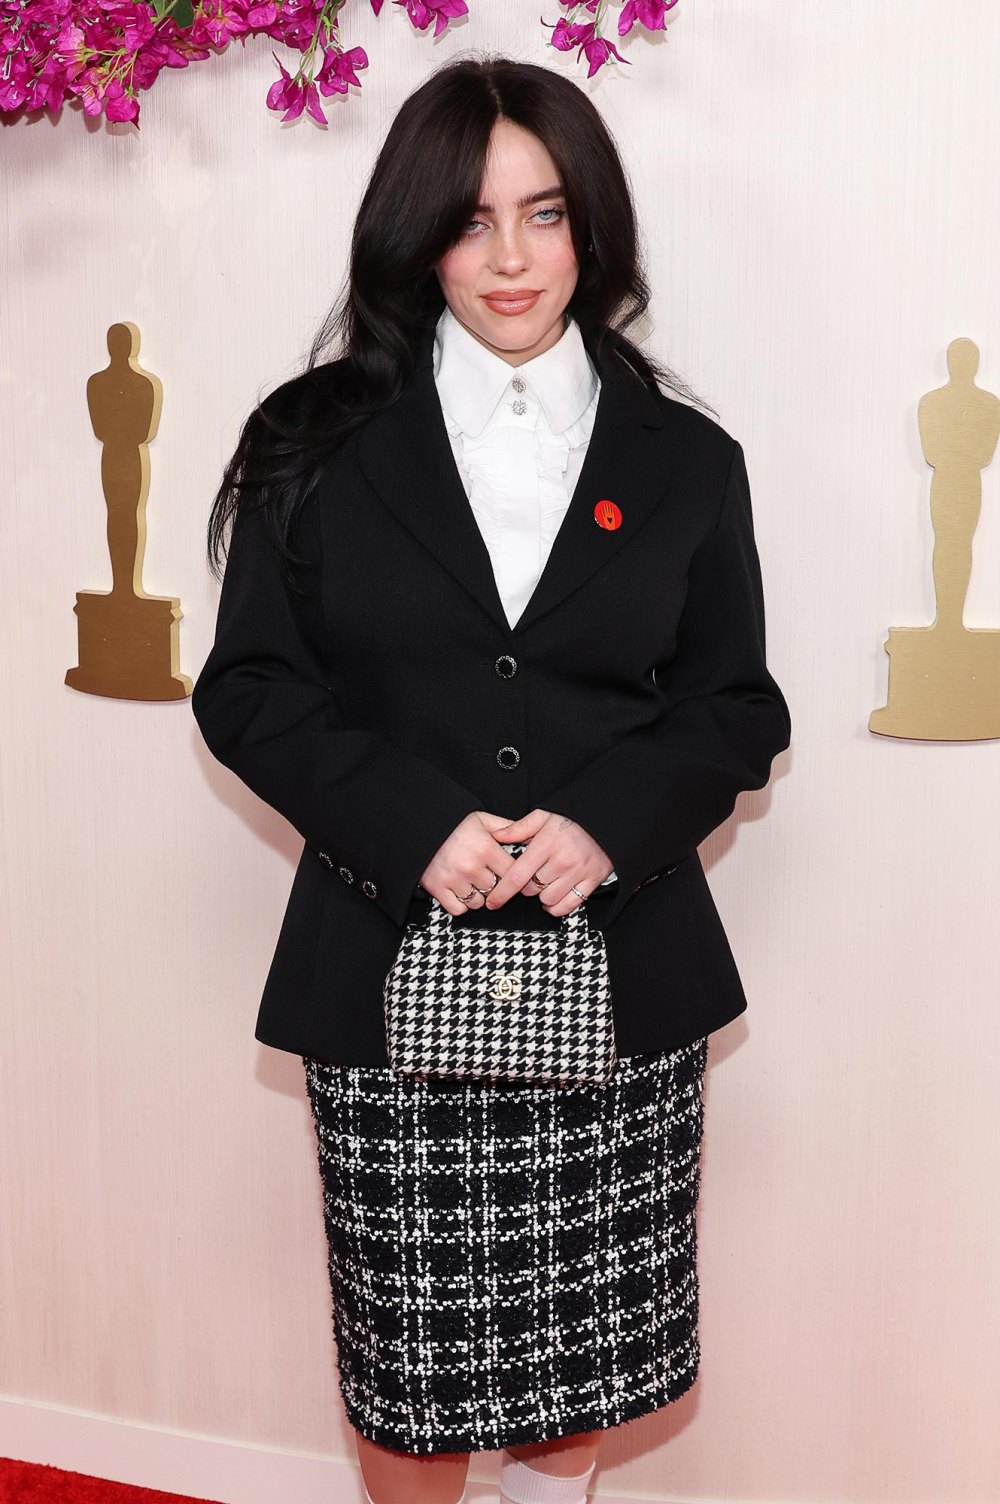 2074183460 HOLLYWOOD, CALIFORNIA - MARCH 10: Billie Eilish attends the 96th Annual Academy Awards on March 10, 2024 in Hollywood, California. (Photo by Marleen Moise/Getty Images)